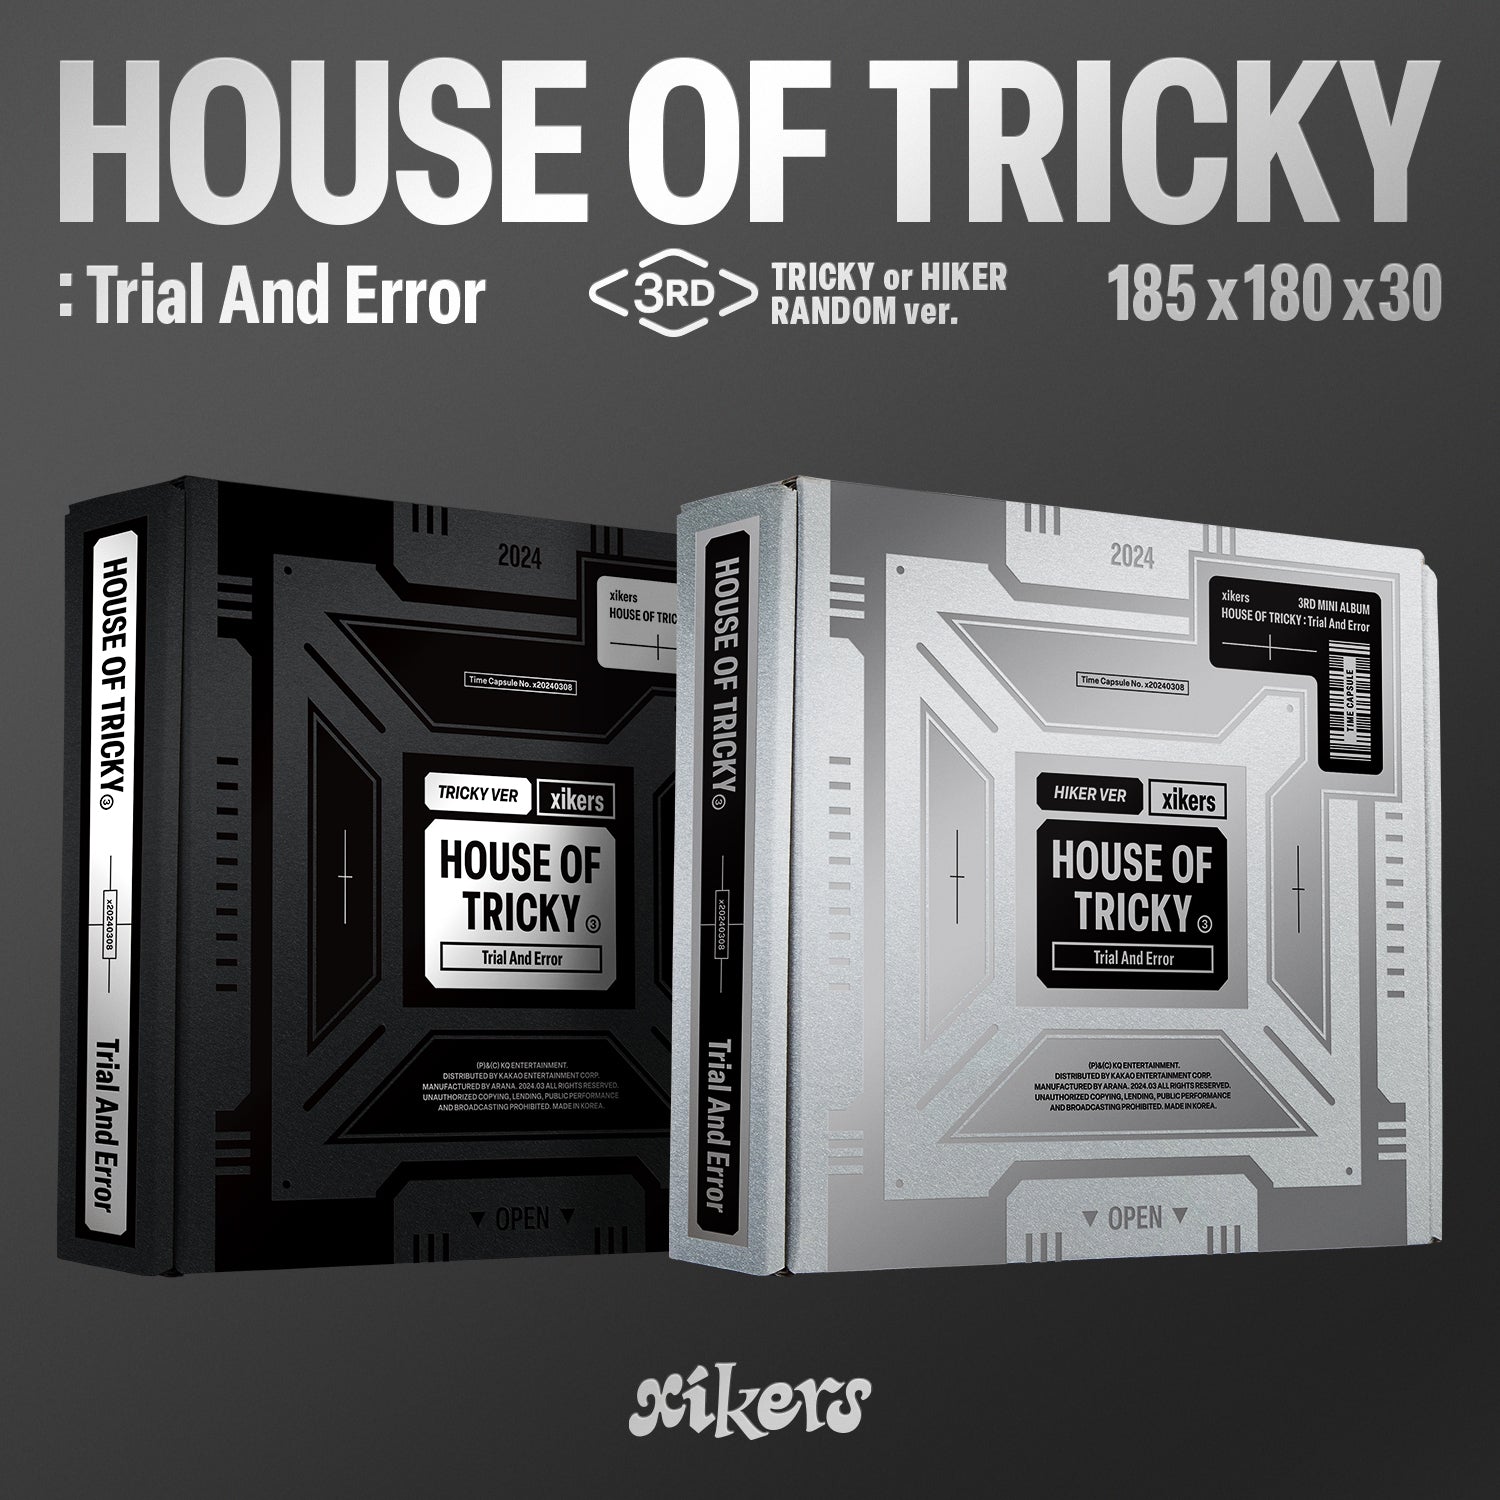 XIKERS 3rd Mini Album HOUSE OF TRICKY : Trial And Error + APPLE MUSIC POB